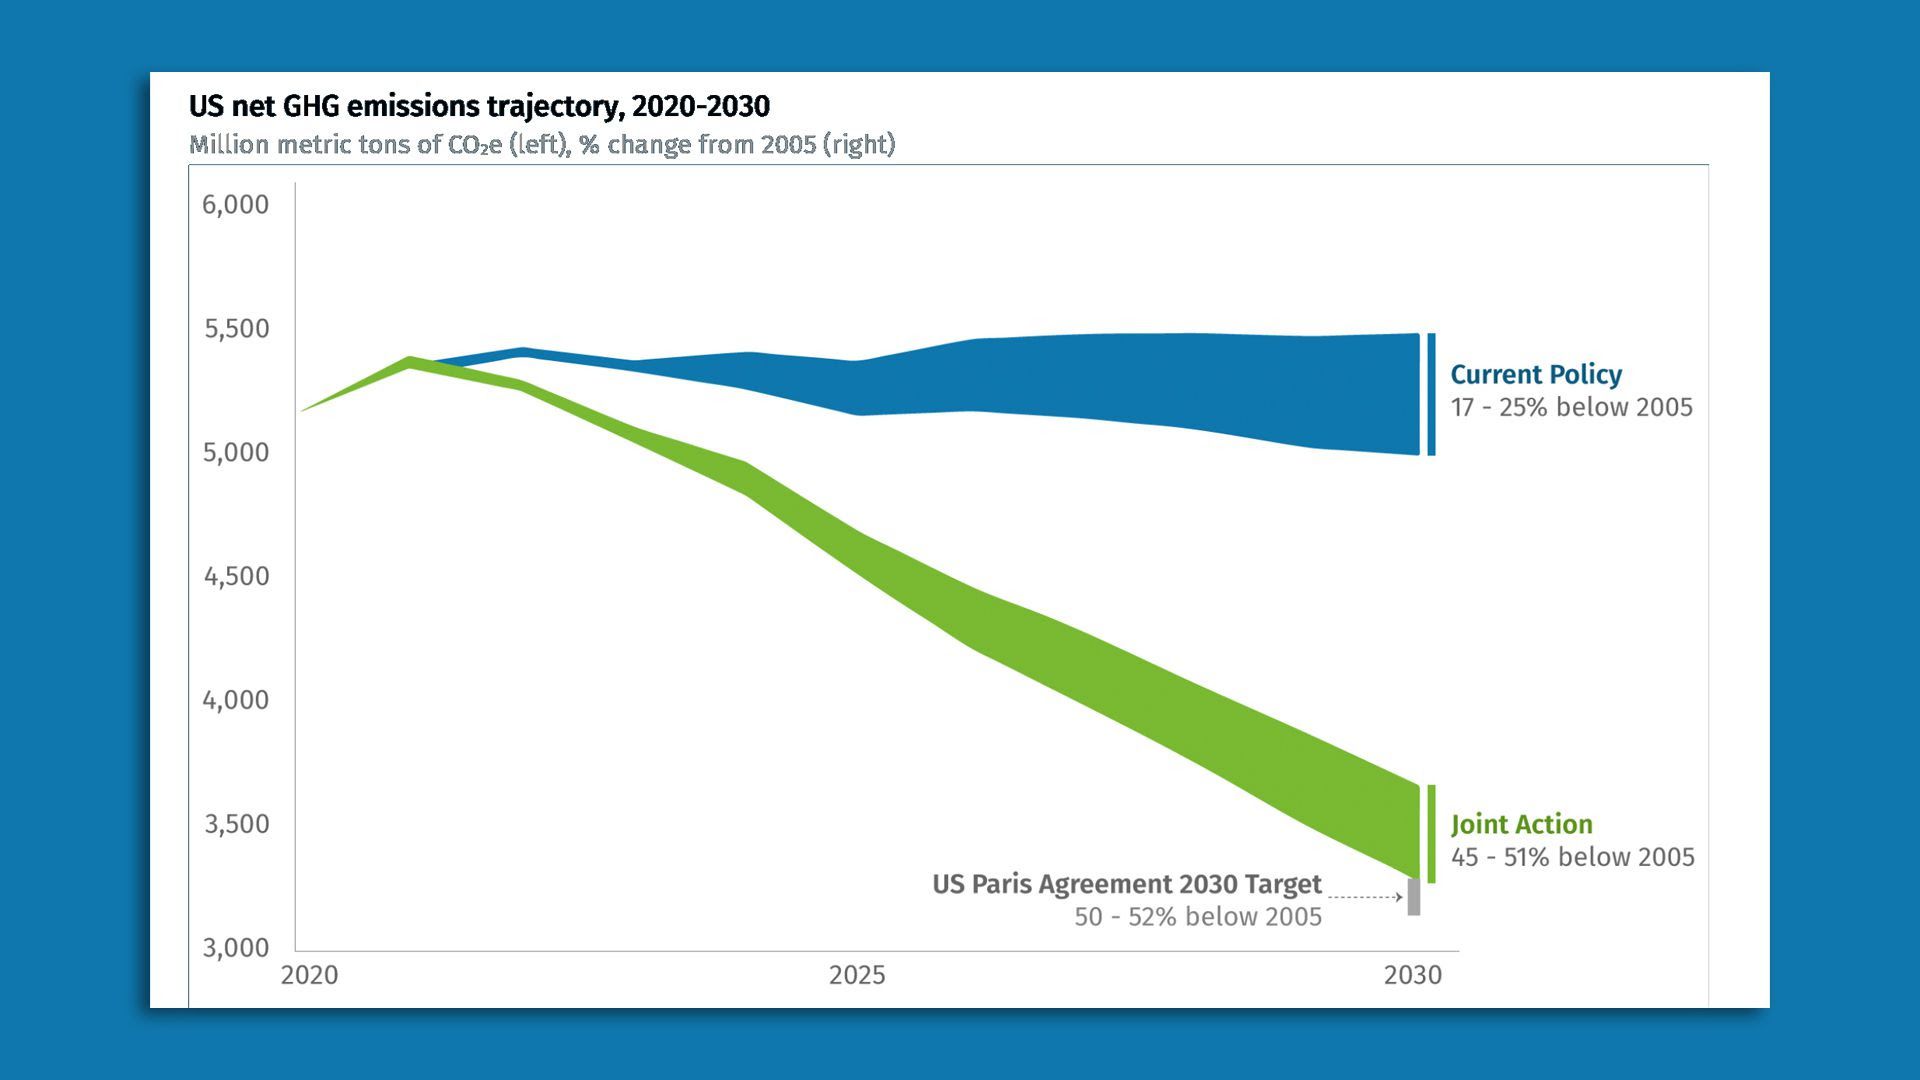 Image showing the US net GHG emissions trajectory from 2020-2030.